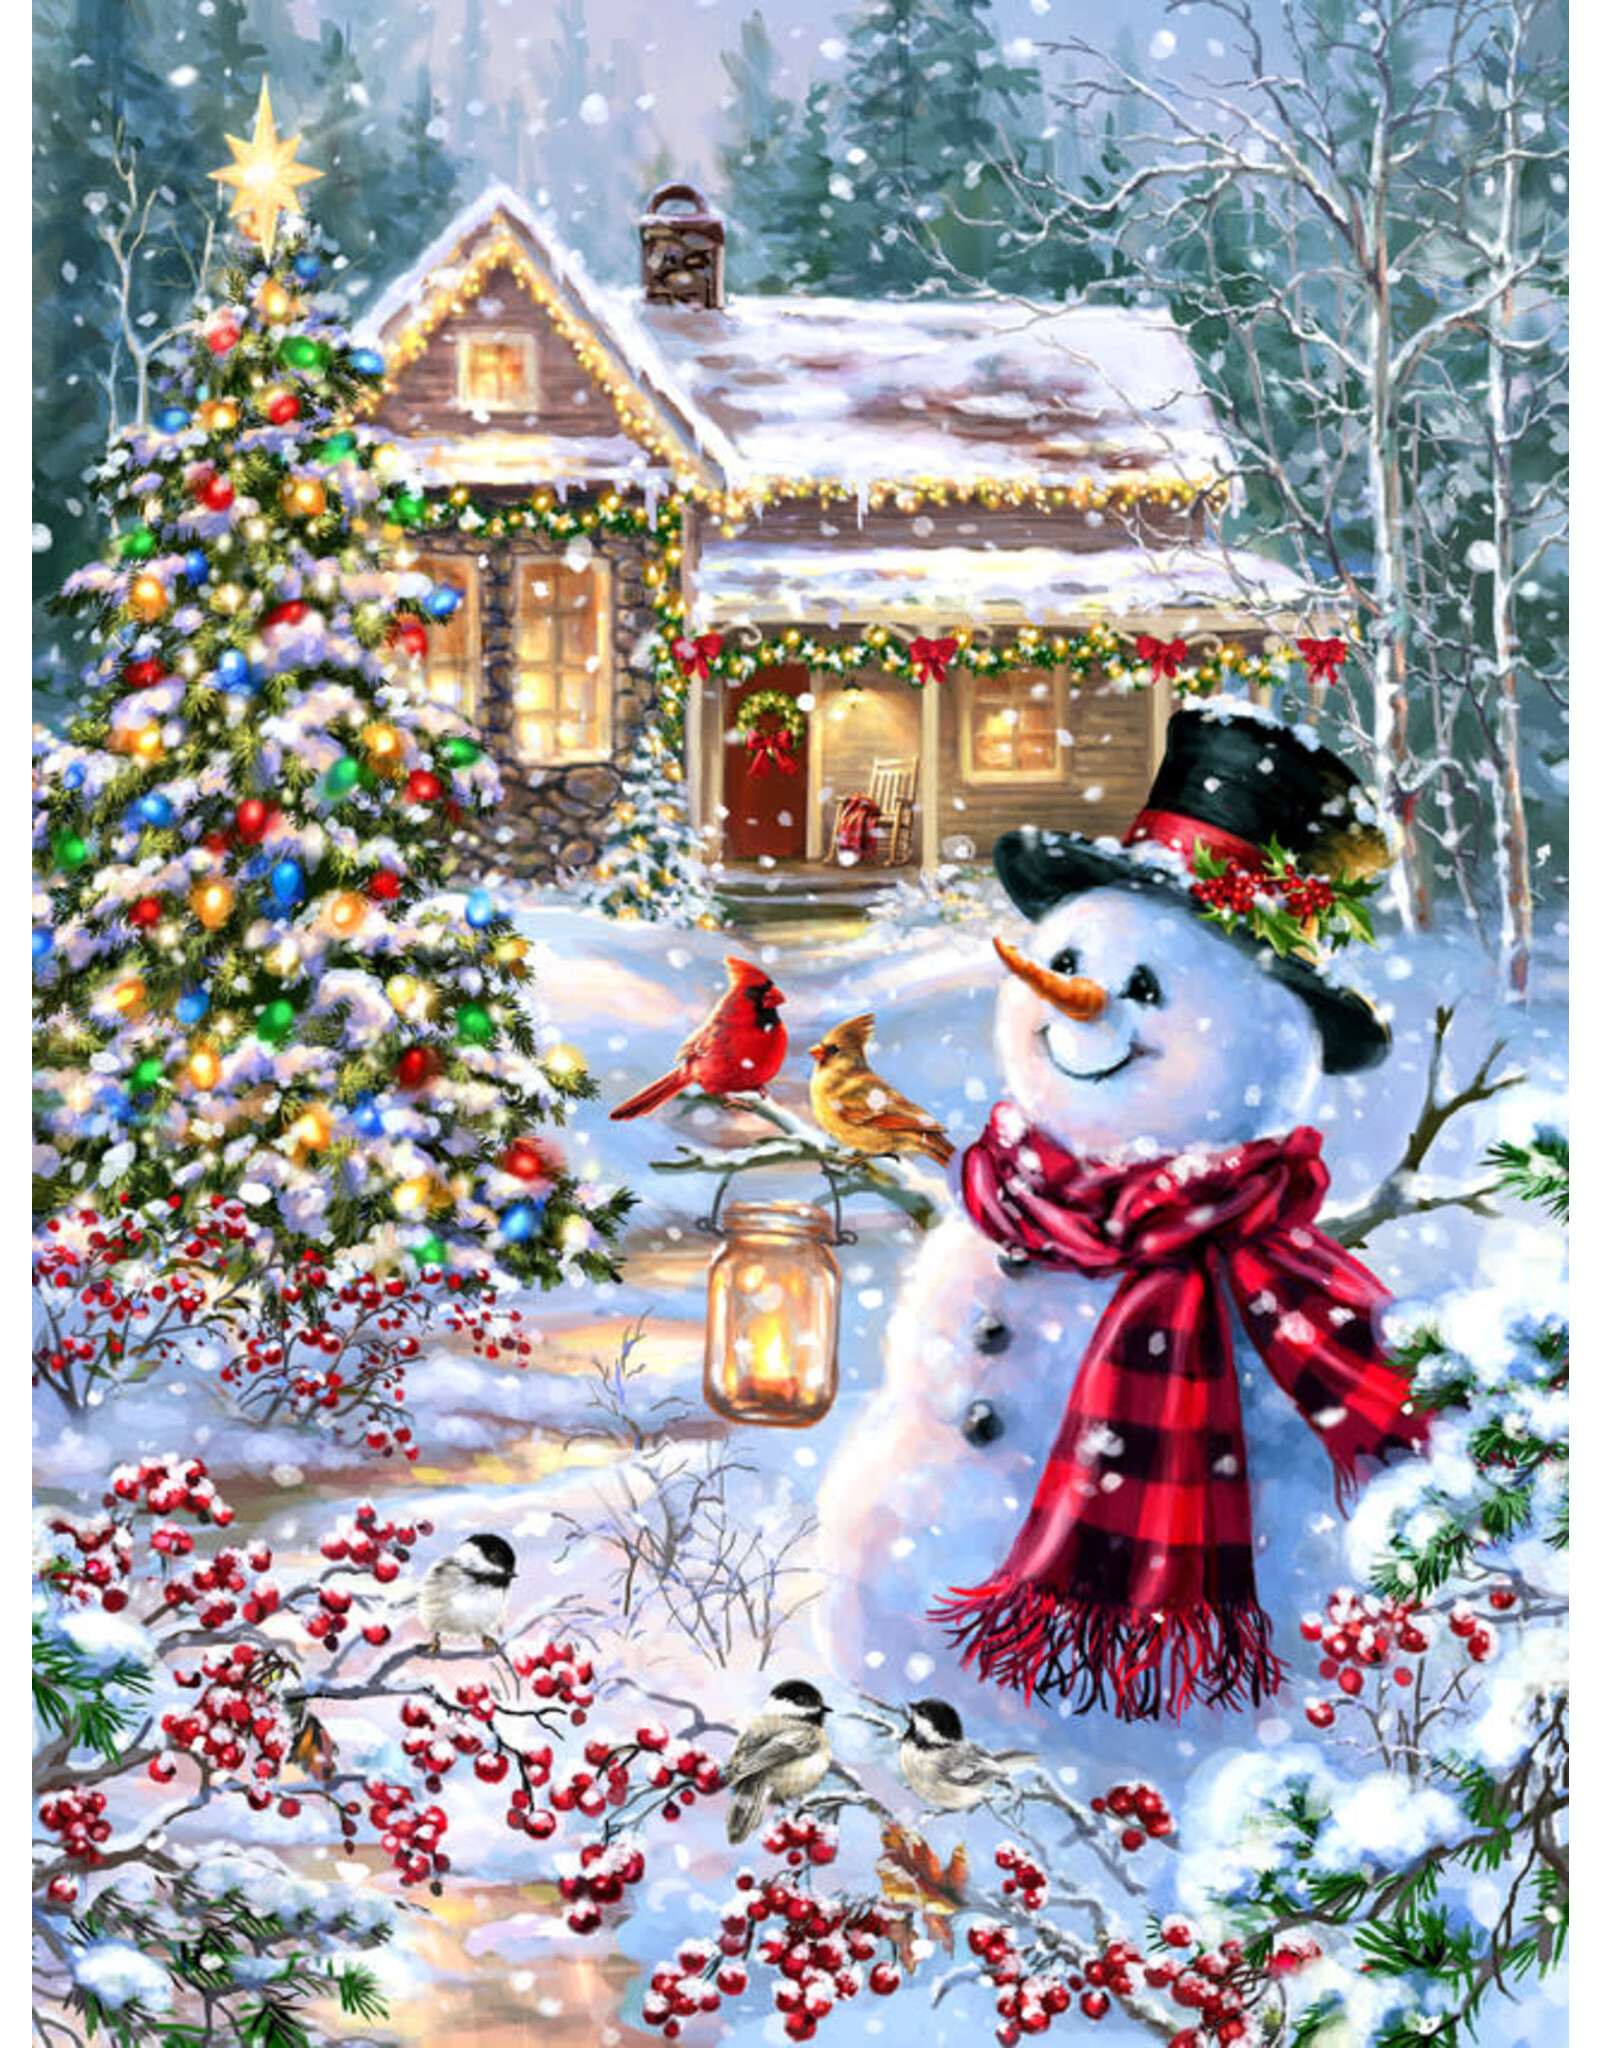 Cottage in the Snow 1000 Piece Jigsaw Puzzle